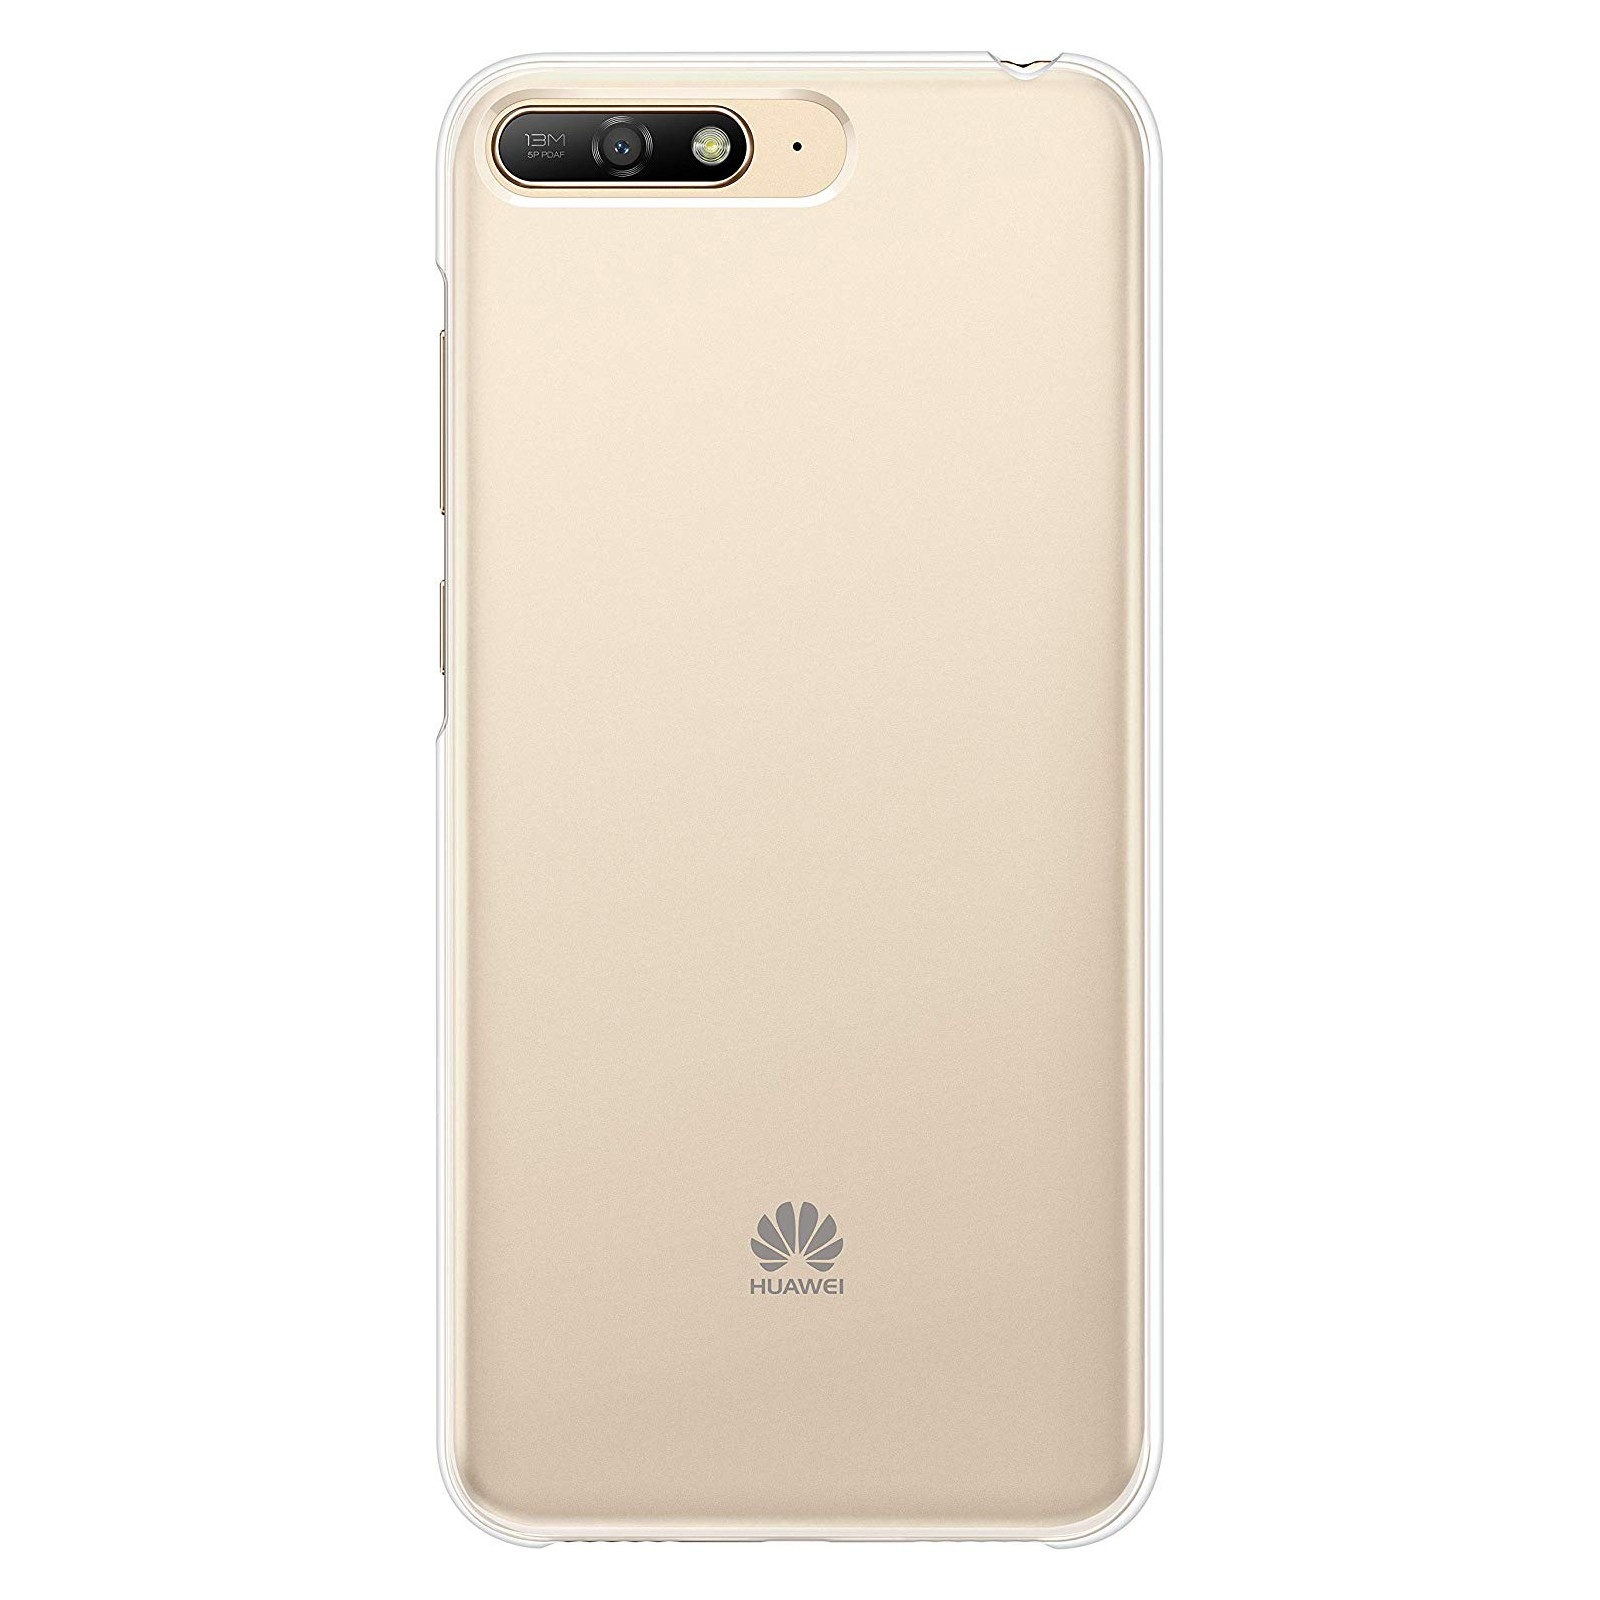 HUAWEI 51992440 Y6 Backcover, Huawei, 2018 Transparent Y6 TRANSPARENT, CASE PC 2018